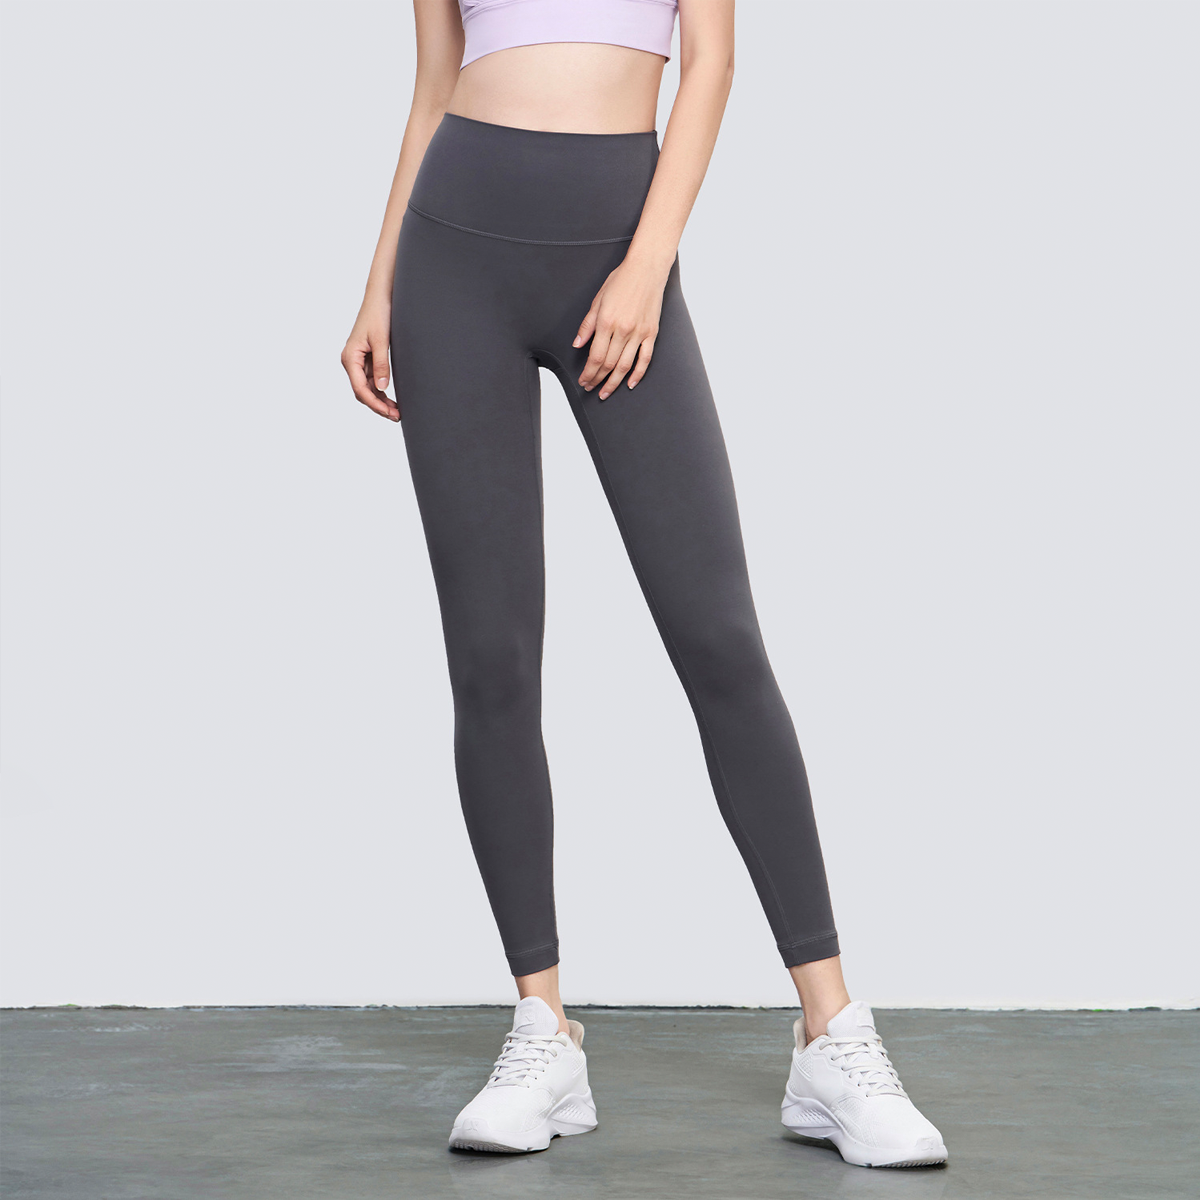 Women's High Waist Yoga Legging, Best Yoga, Sports, Workout, Running & Training  Pants for Sale at the Lowest Prices – SHEJOLLY